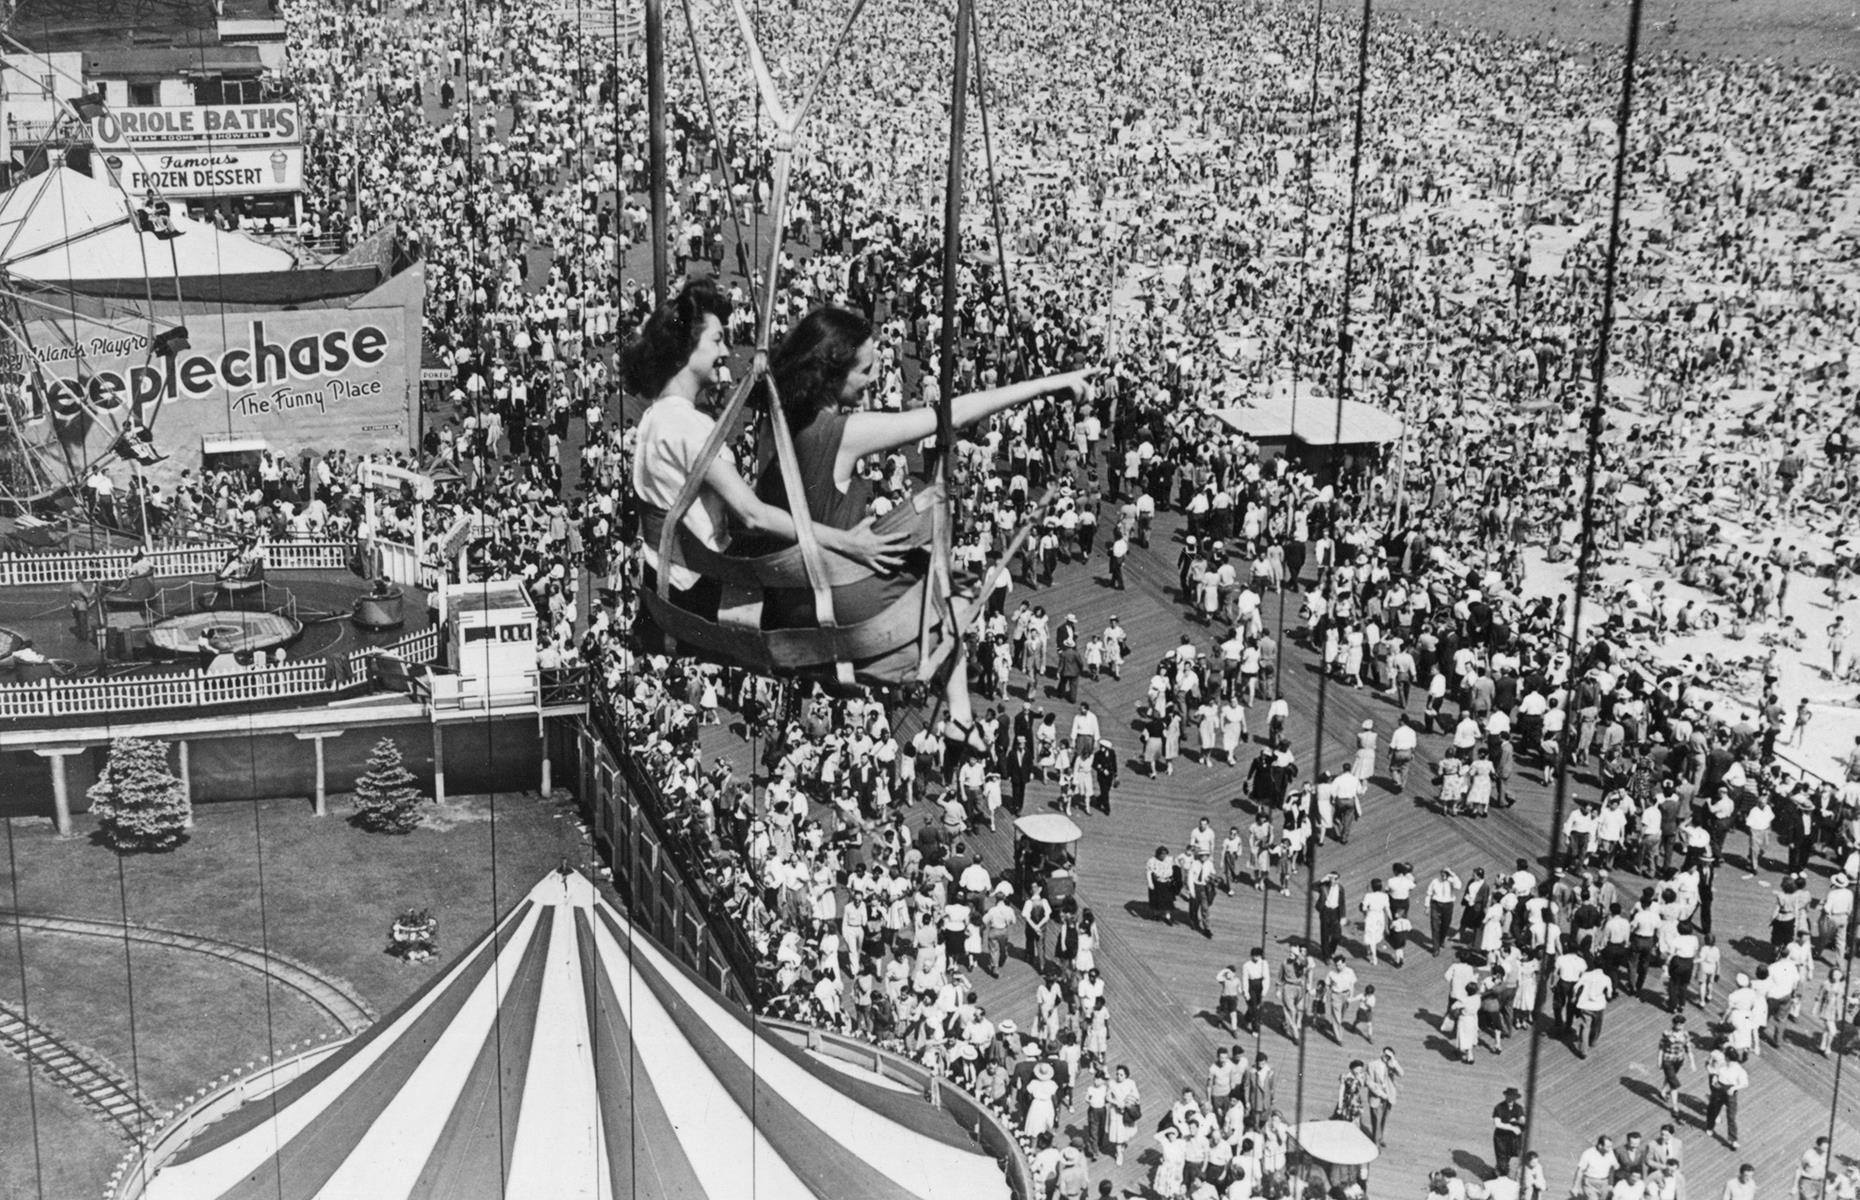 Fast-forward to the 1940s and Coney Island was as popular as ever. In this aerial shot, hordes of vacationers appear like ants across Coney Islands sands and boardwalk, as a pair of women ride the now defunct Parachute Jump. The ride was part of Coney's Steeplechase Park, which closed its gates in the 1960s.